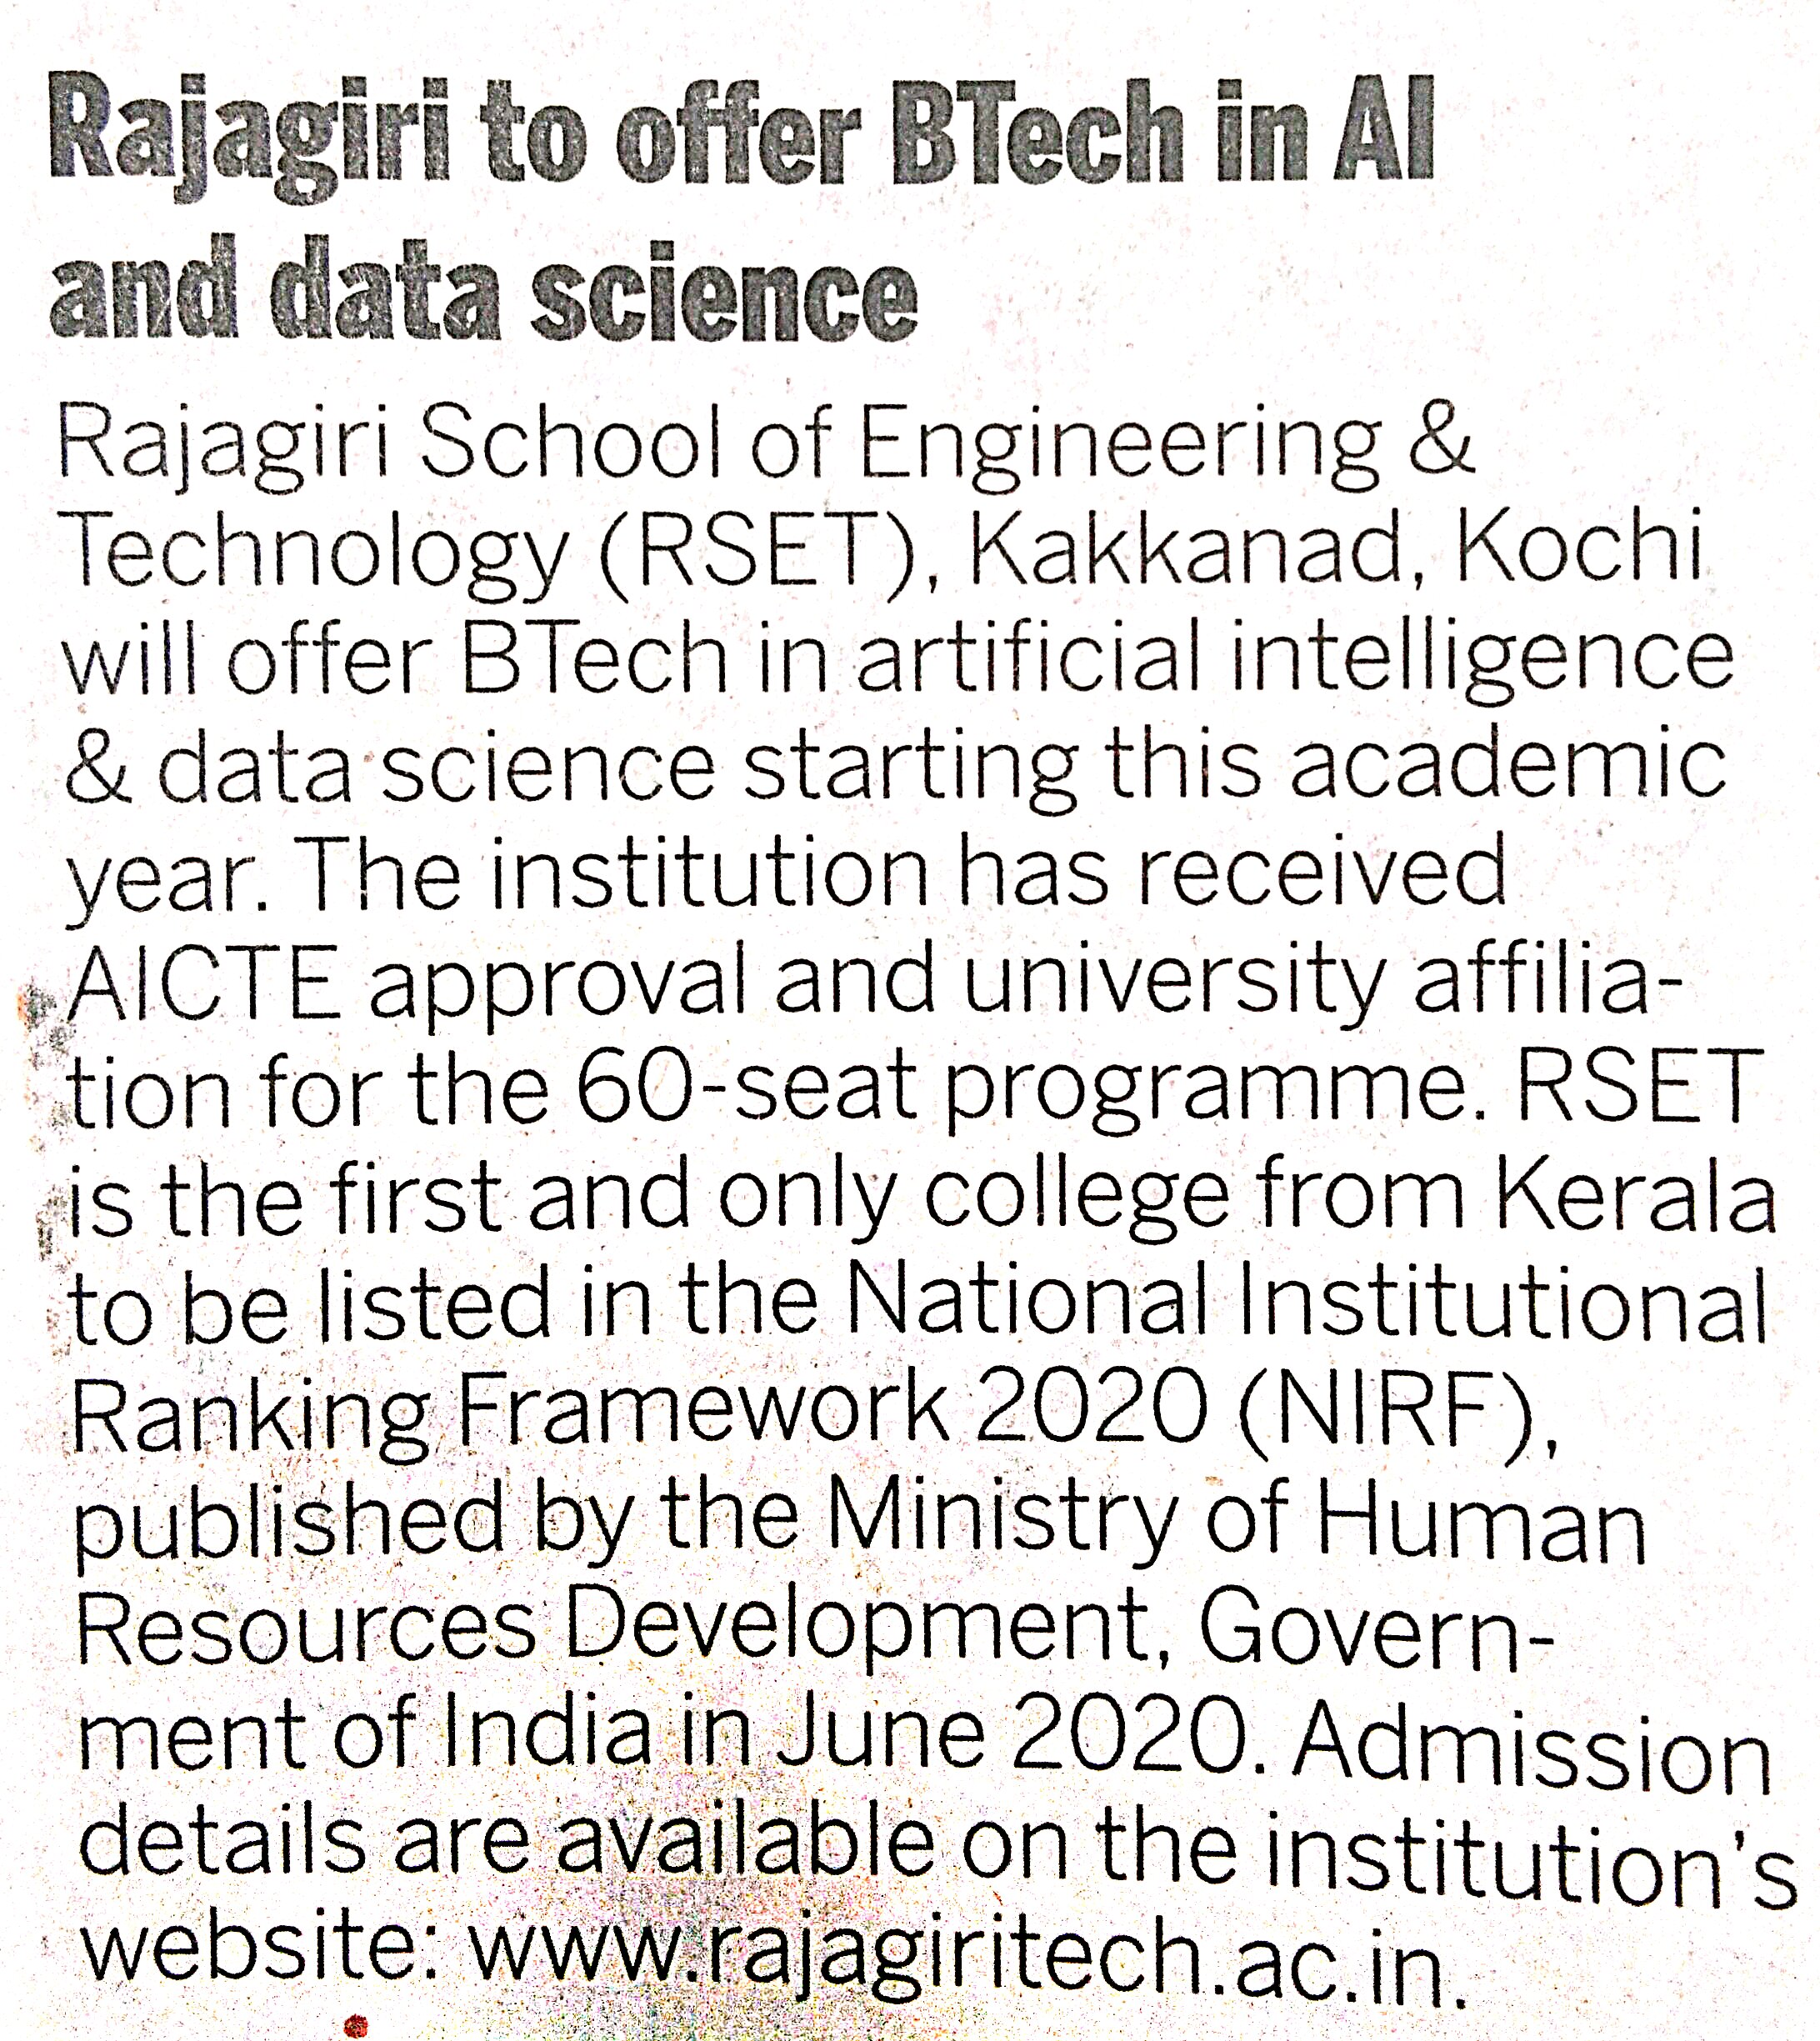 R S E T offer B,Tech in artificial intelligence and data science